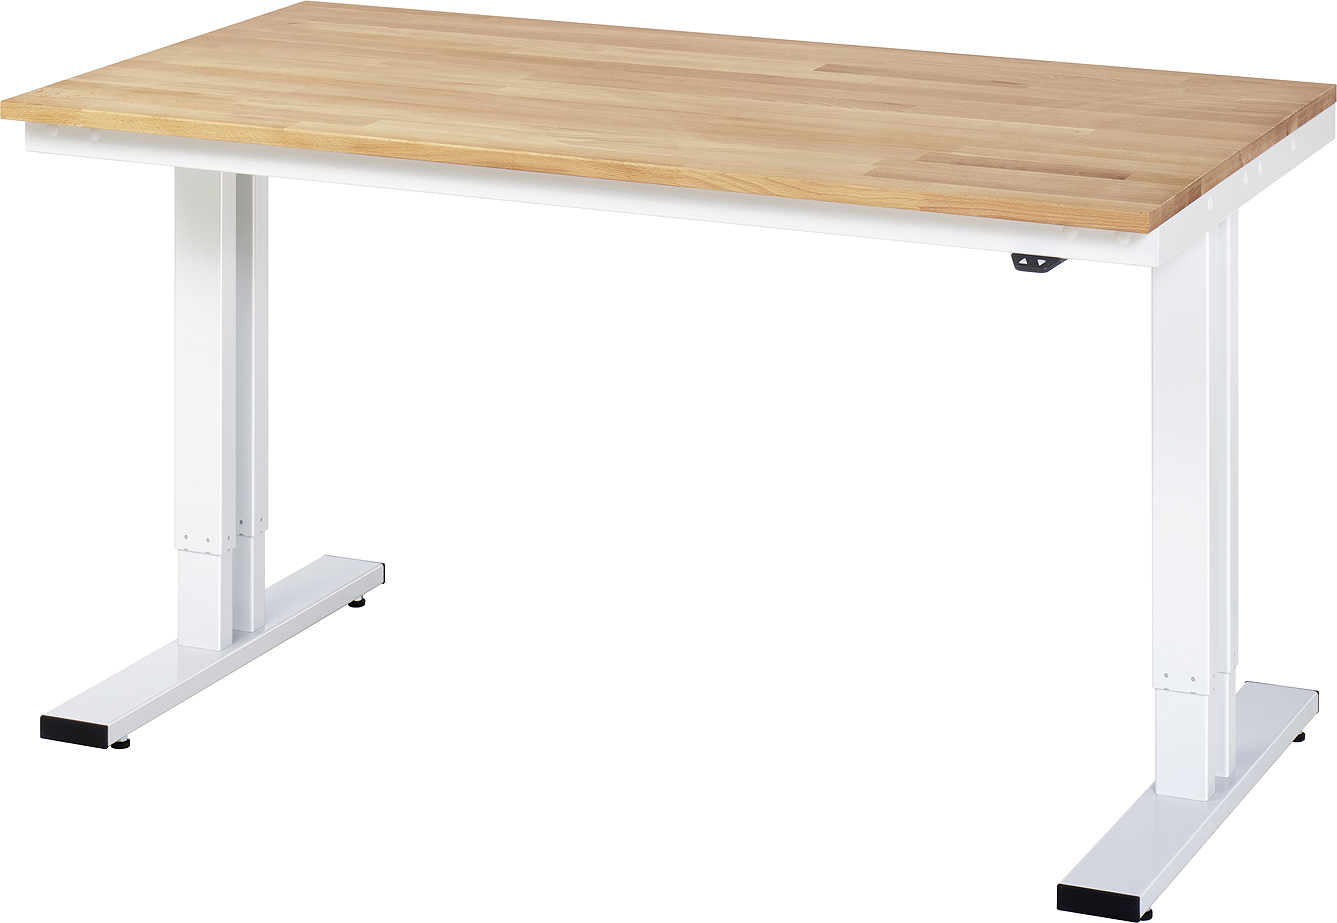 Electrically height-adjustable workbench adlatus - Width 1500 x depth 800 x height 720-1120 mm with solid beech worktop, surface load max. 300 kg, fully assembled  